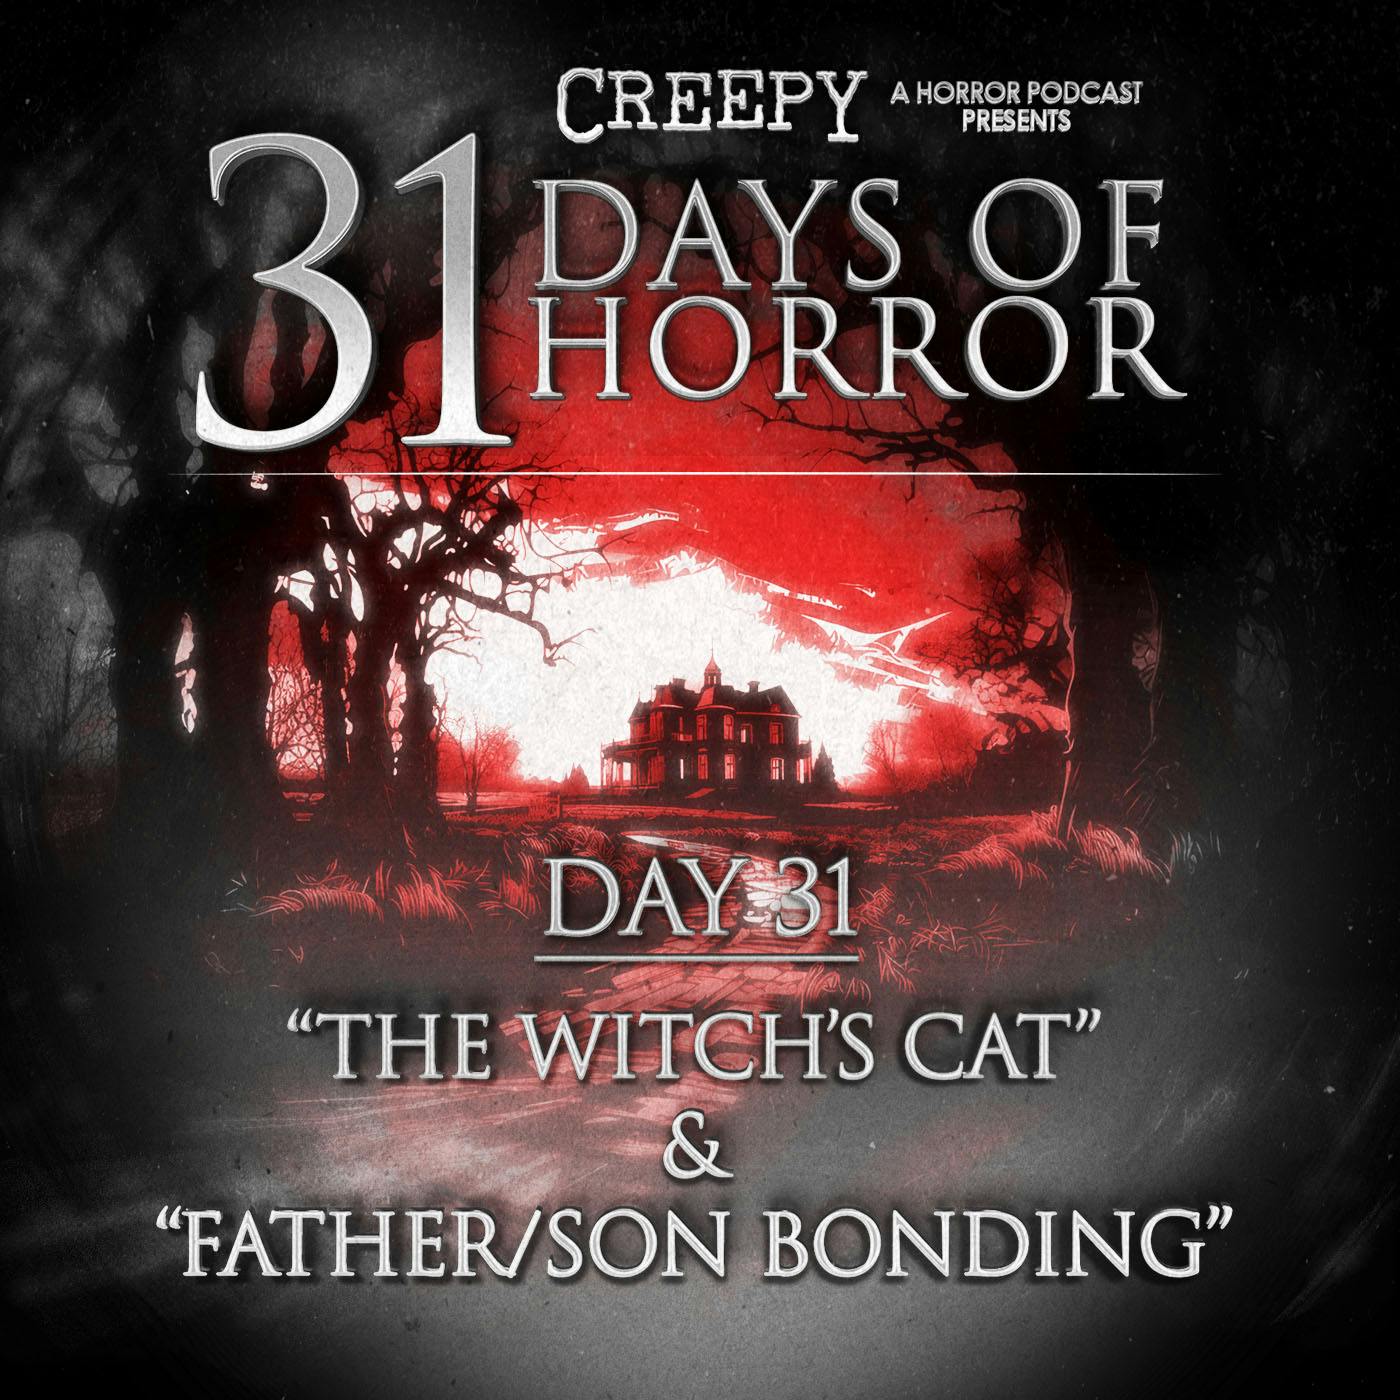 Day 31 - The Witch’s Cat & Father/Son Bonding